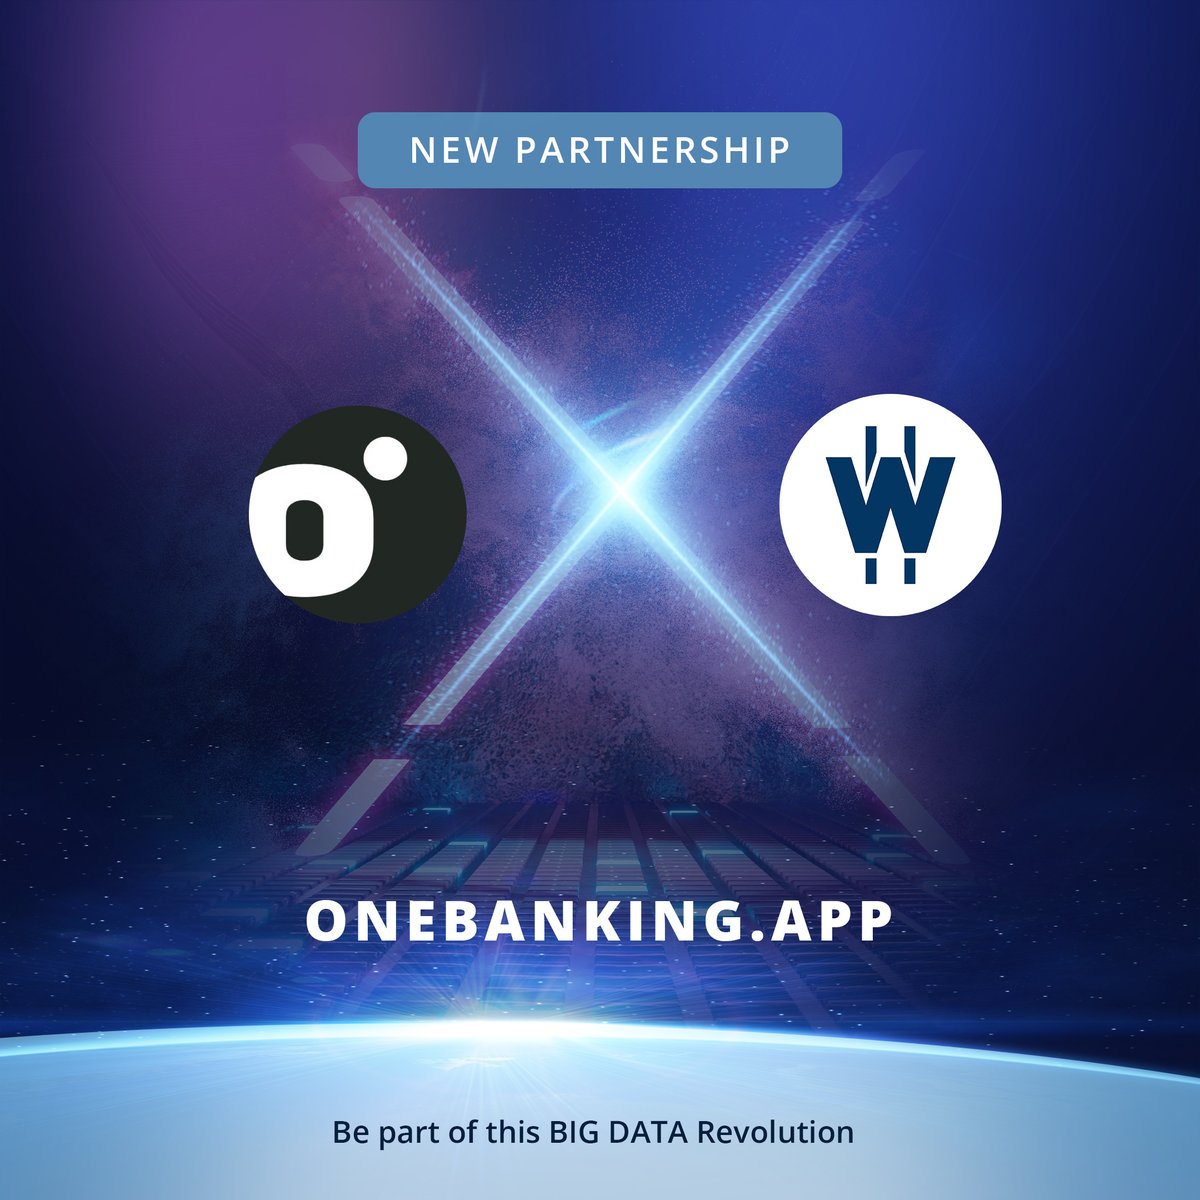 Exciting News! We're partnering with @onebanking_app – the future of banking is here! 🌐✨

Security is our top priority when it comes to your finances. We are therefore proud that #oneBanking is already relying on the security of @WeSendit ® in the start-up phase.

What is